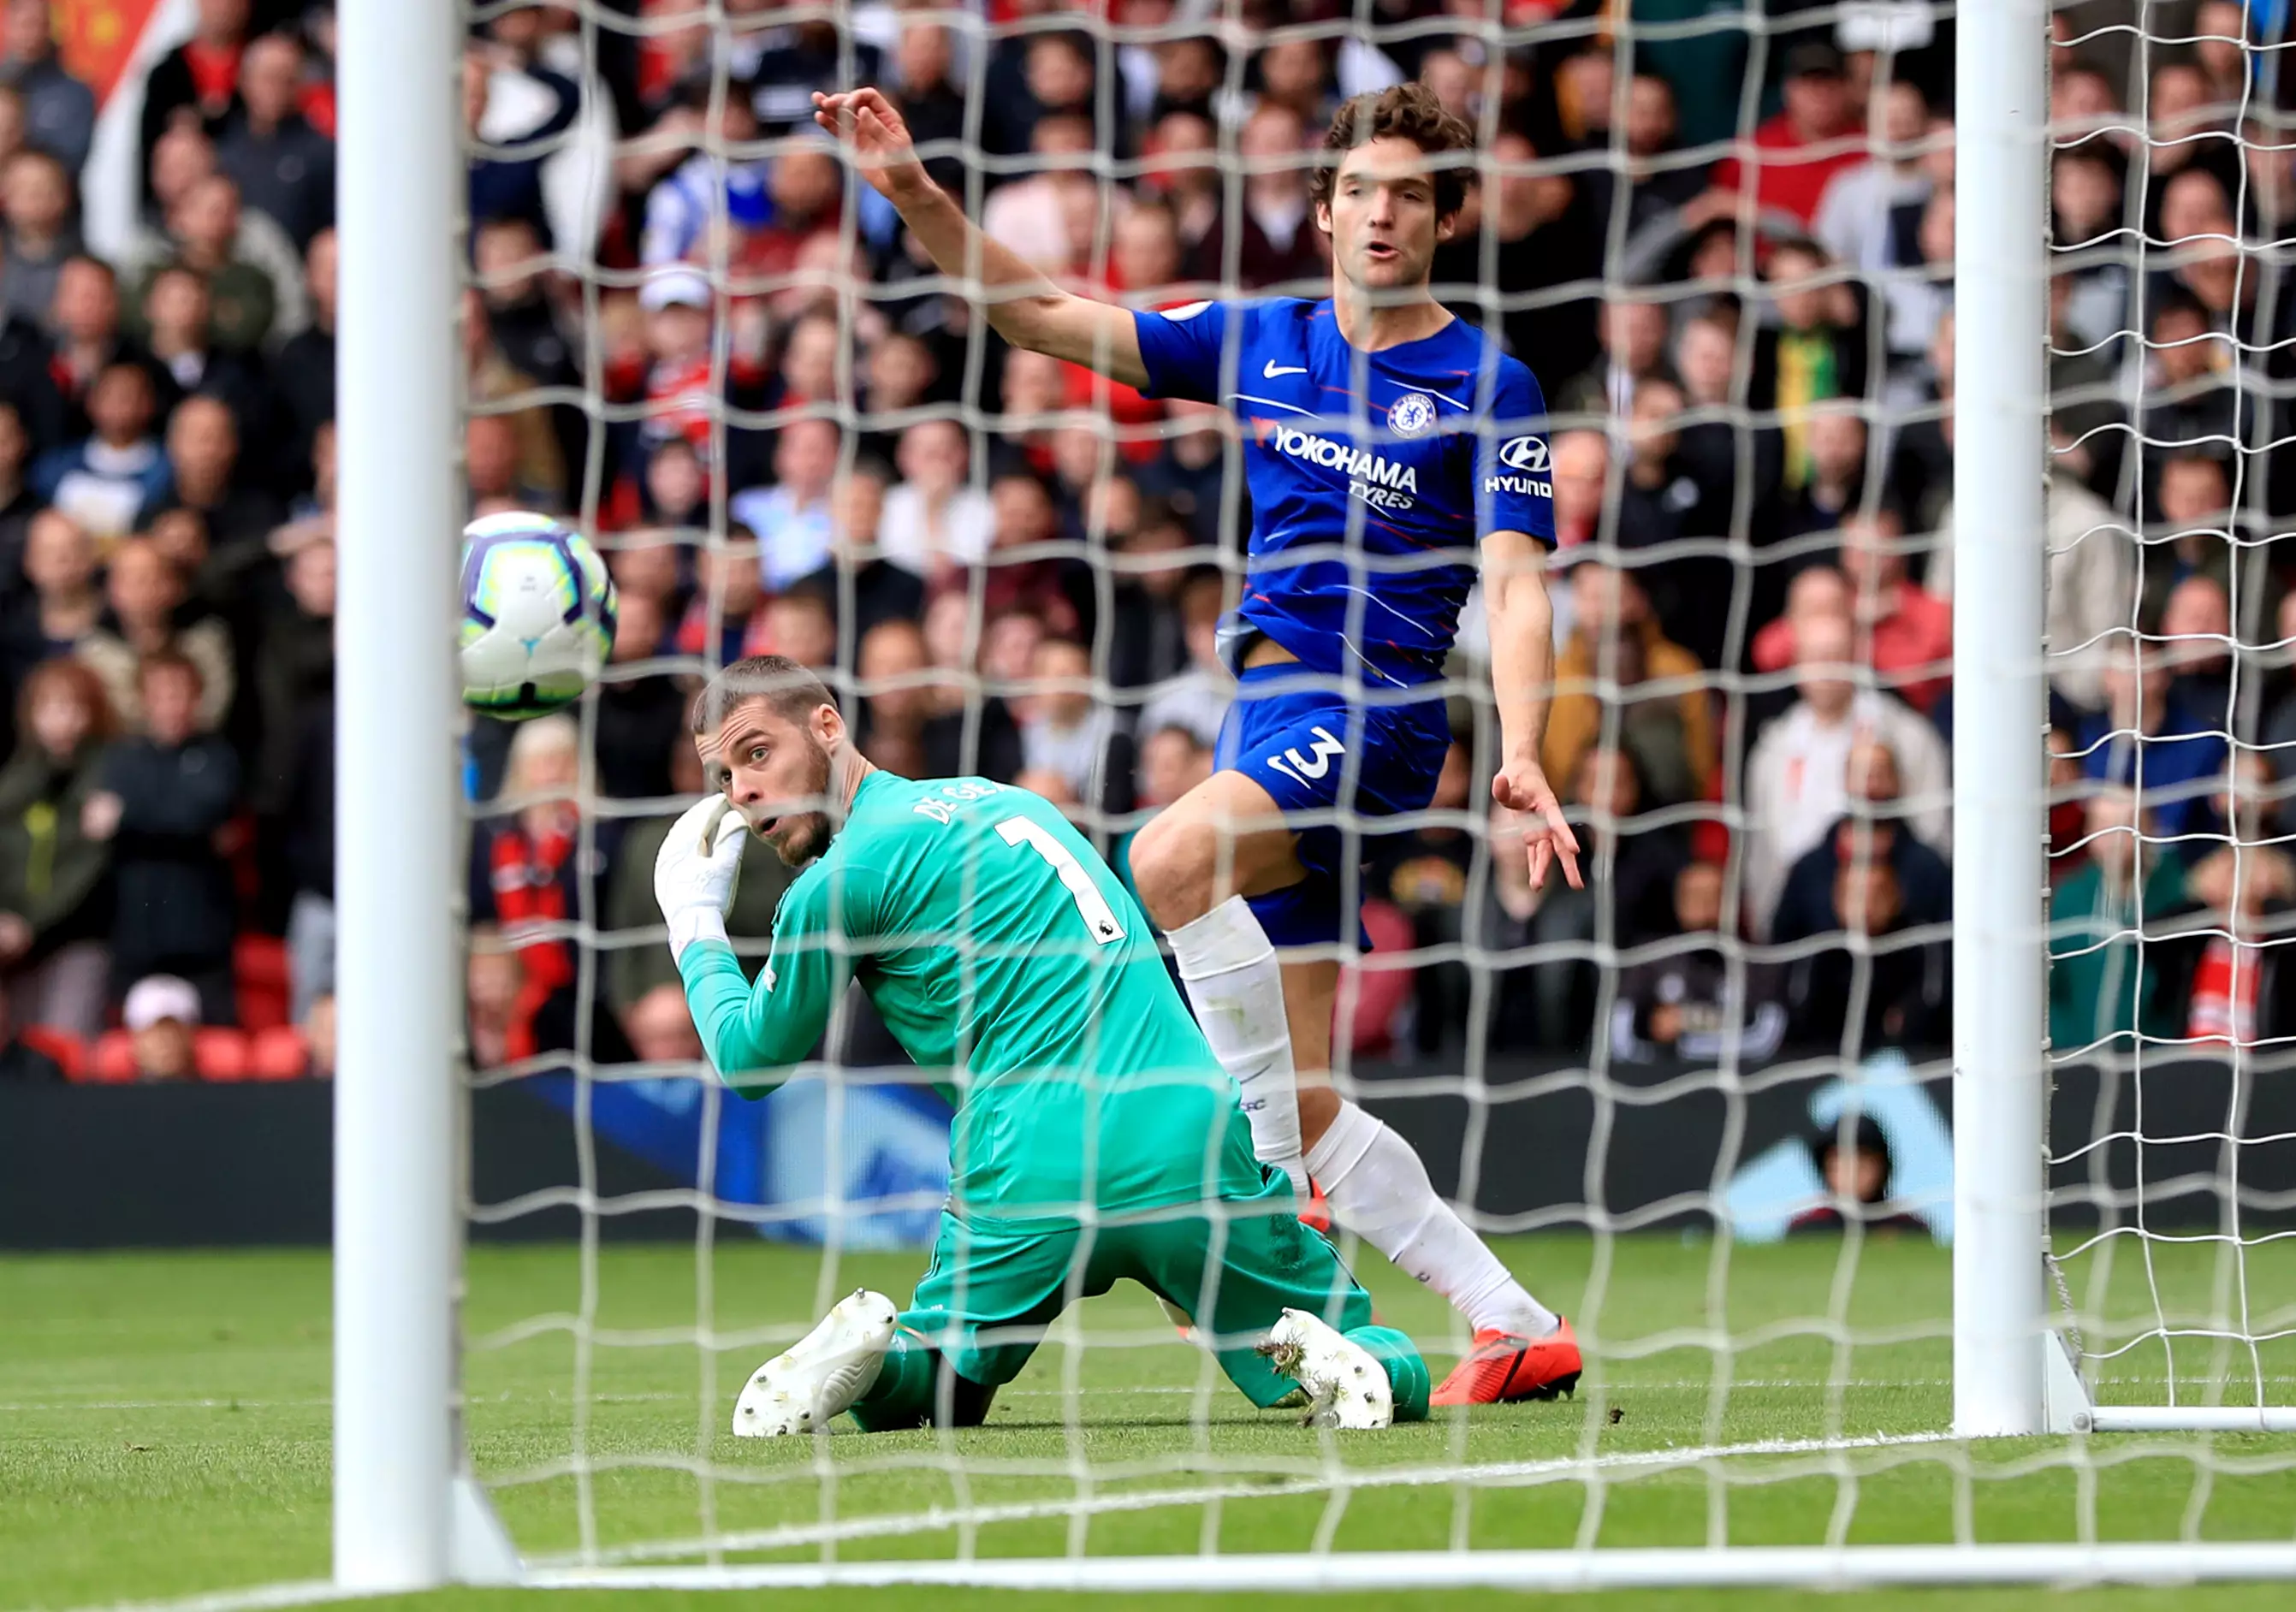 De Gea watches Marco Alonso captialise on his mistake in United's 1-1 draw against Chelsea. (Image